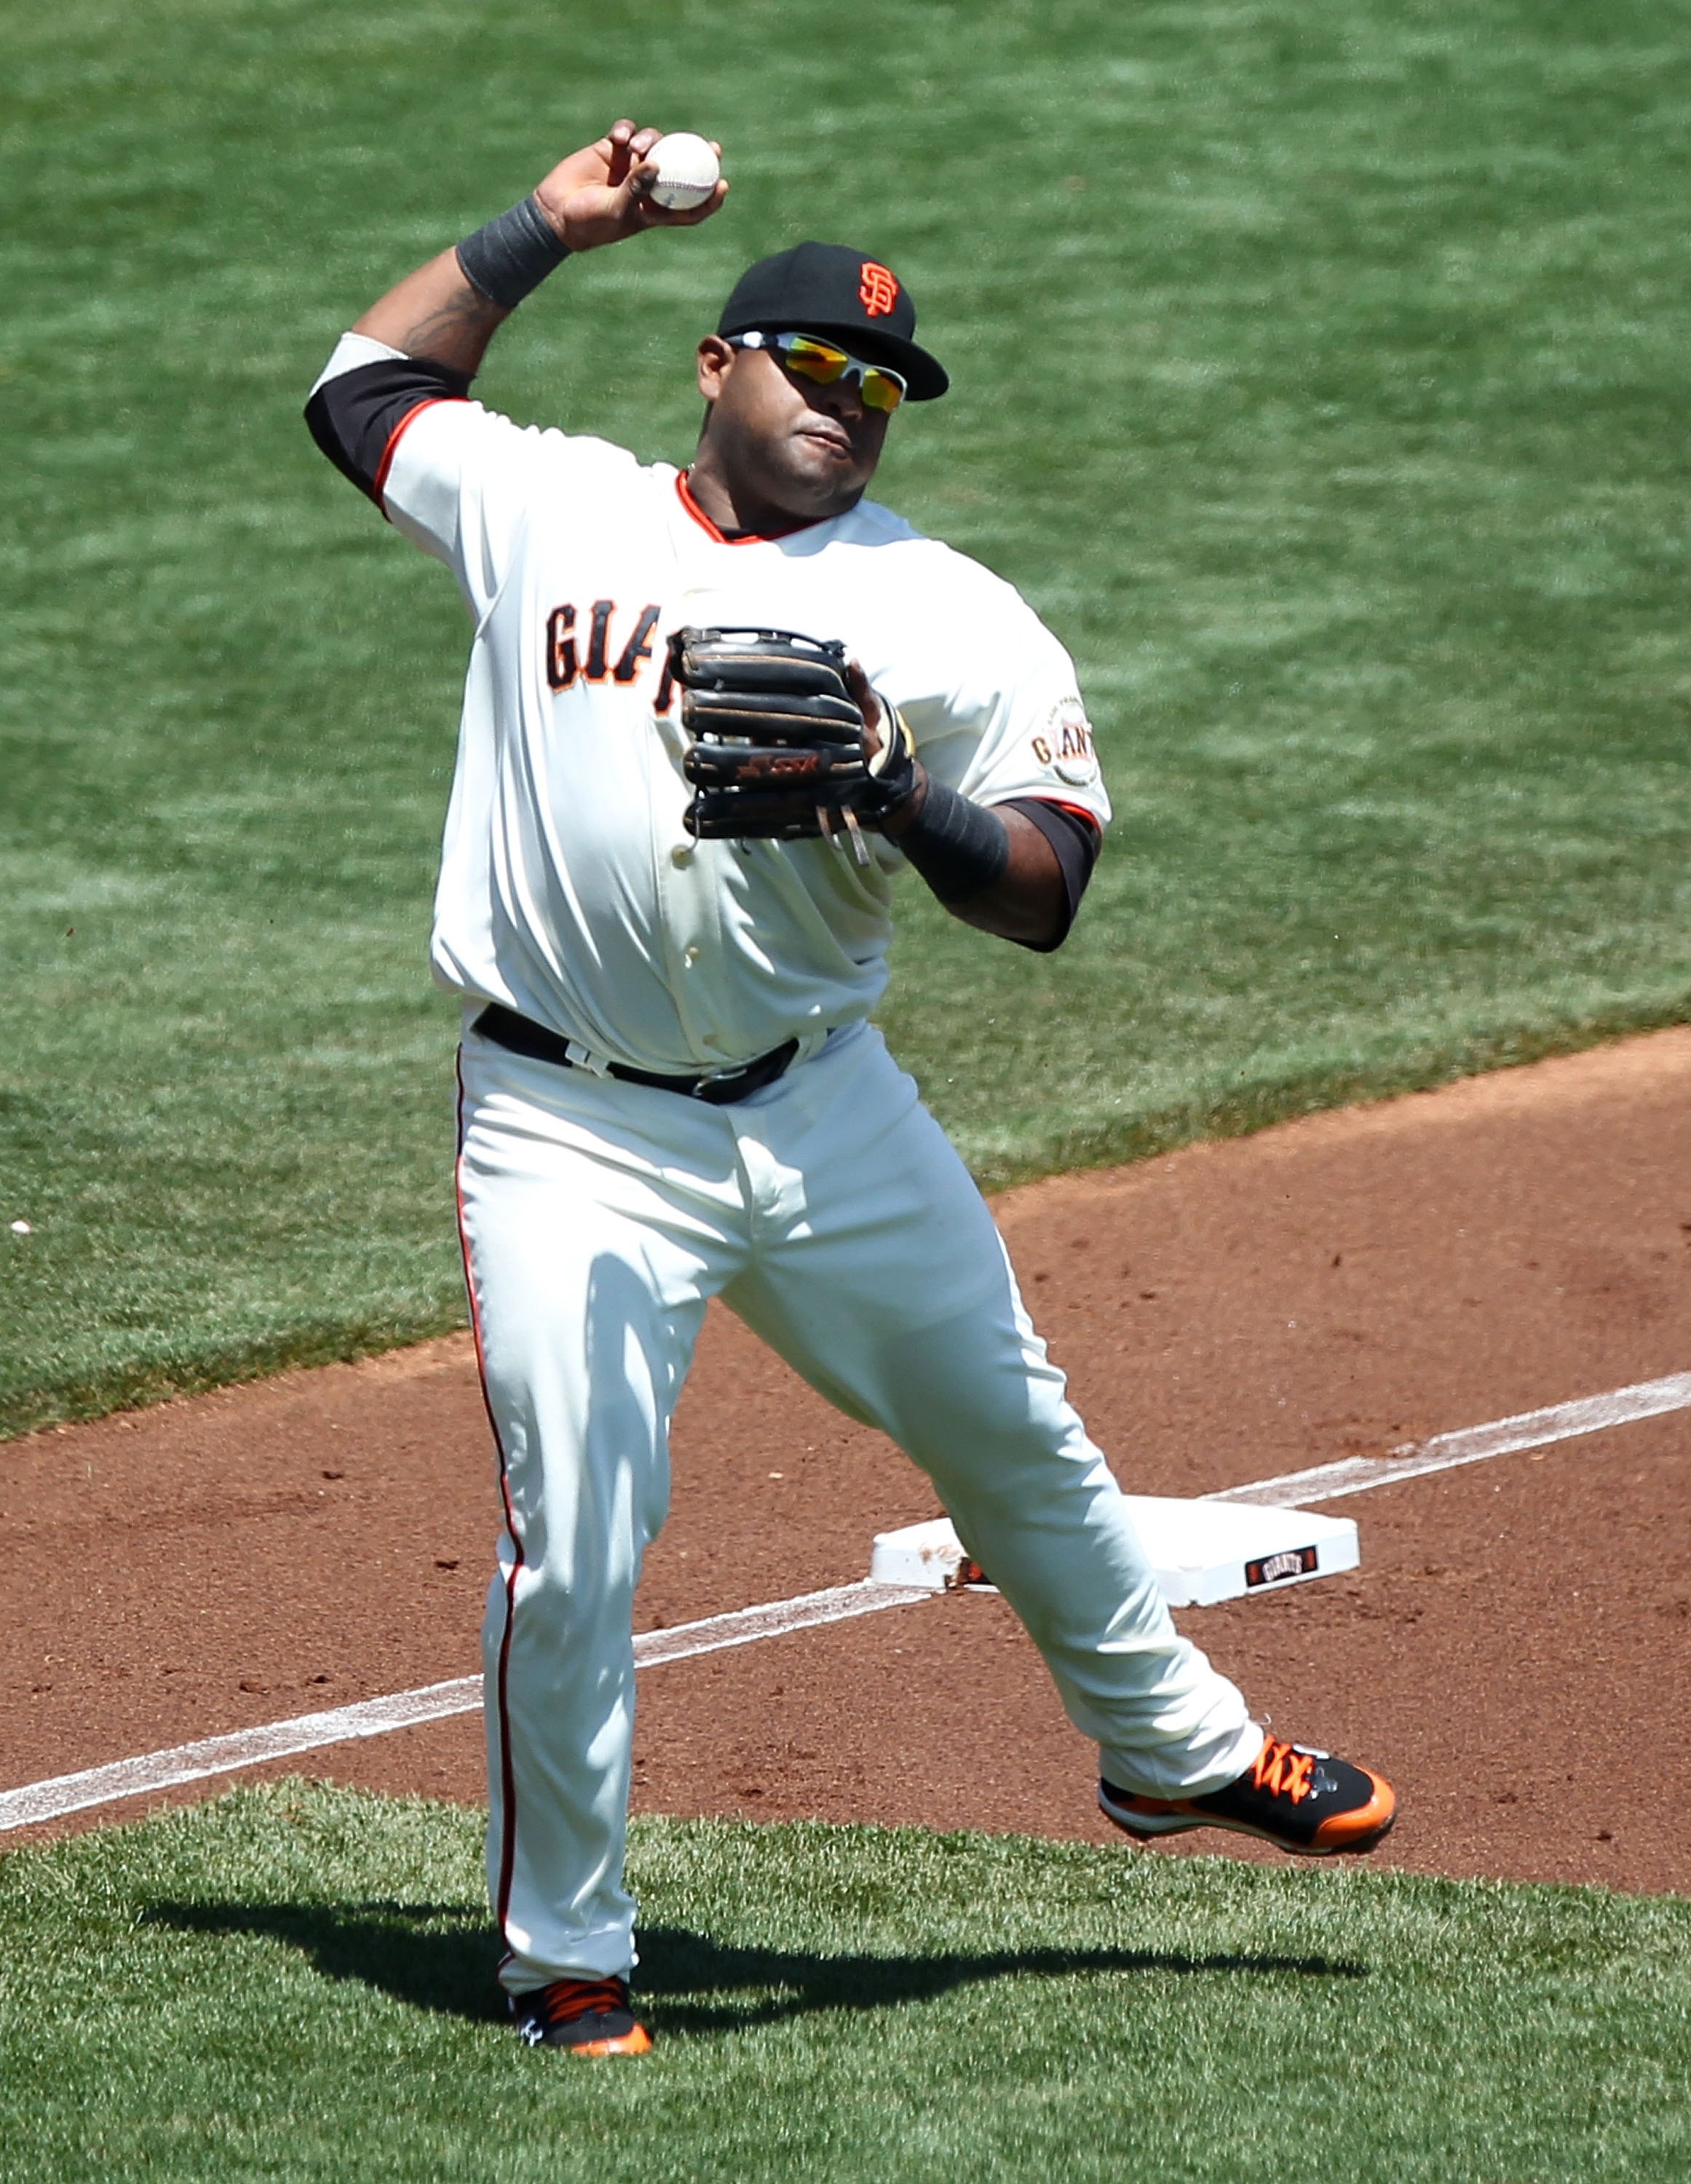 Giants cutting Pablo Sandoval in sad end of an era – KNBR